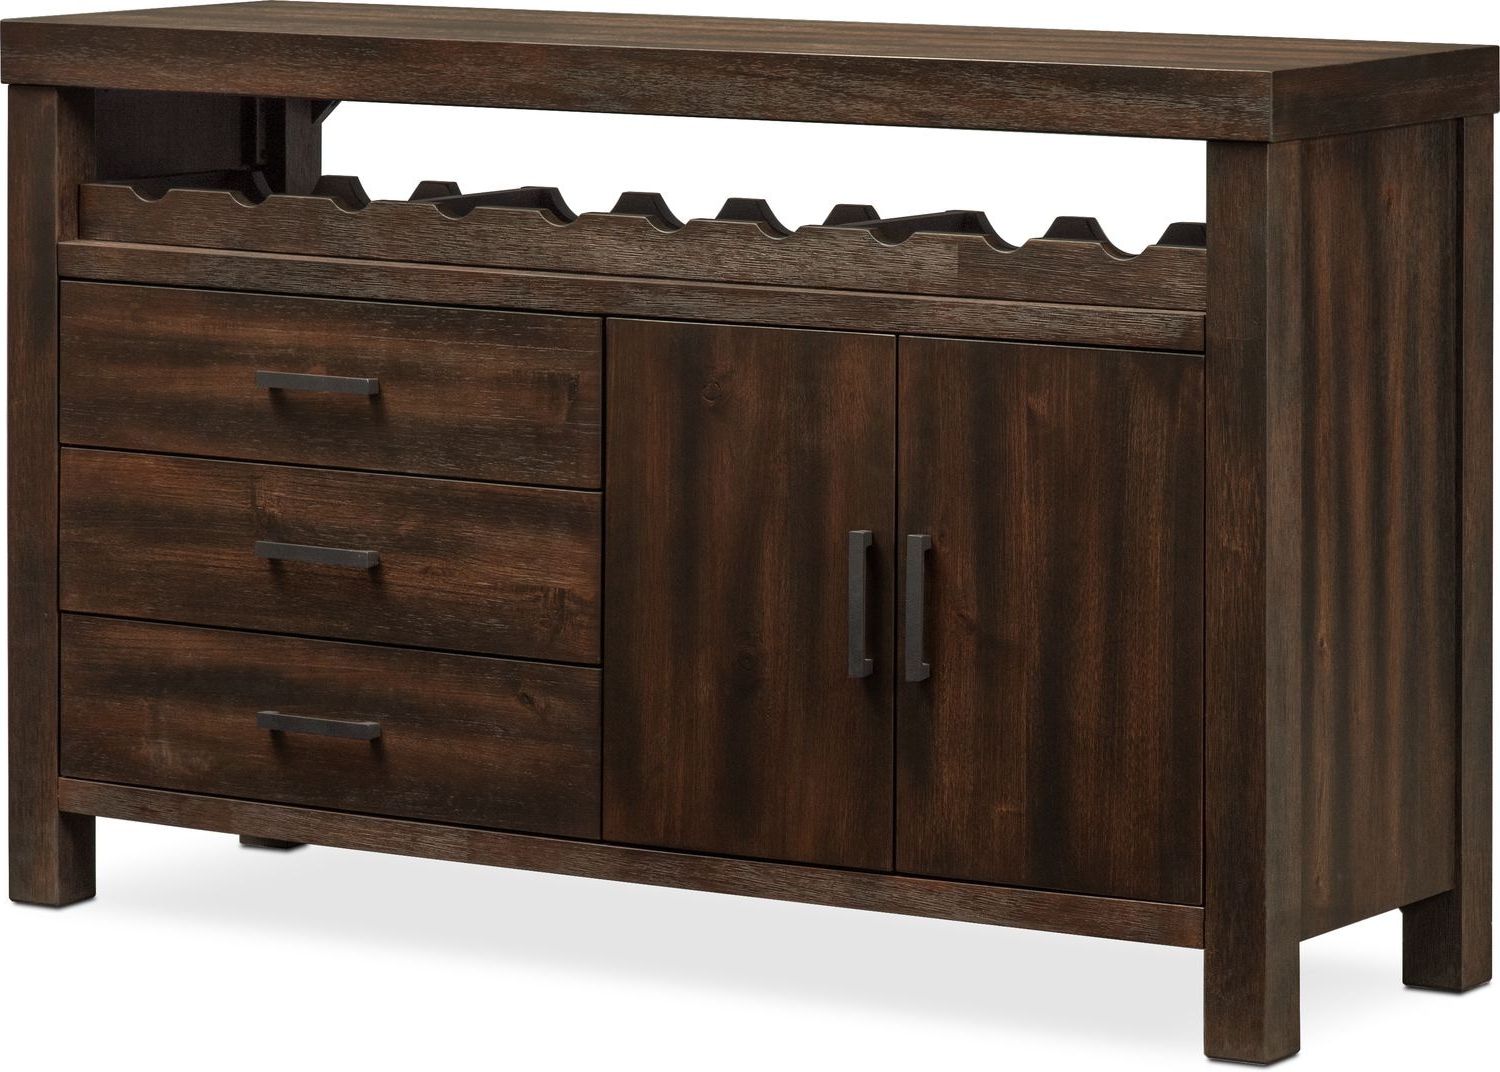 Tribeca Sideboard – Tobacco With Widely Used Tribeca Sideboards (View 12 of 20)